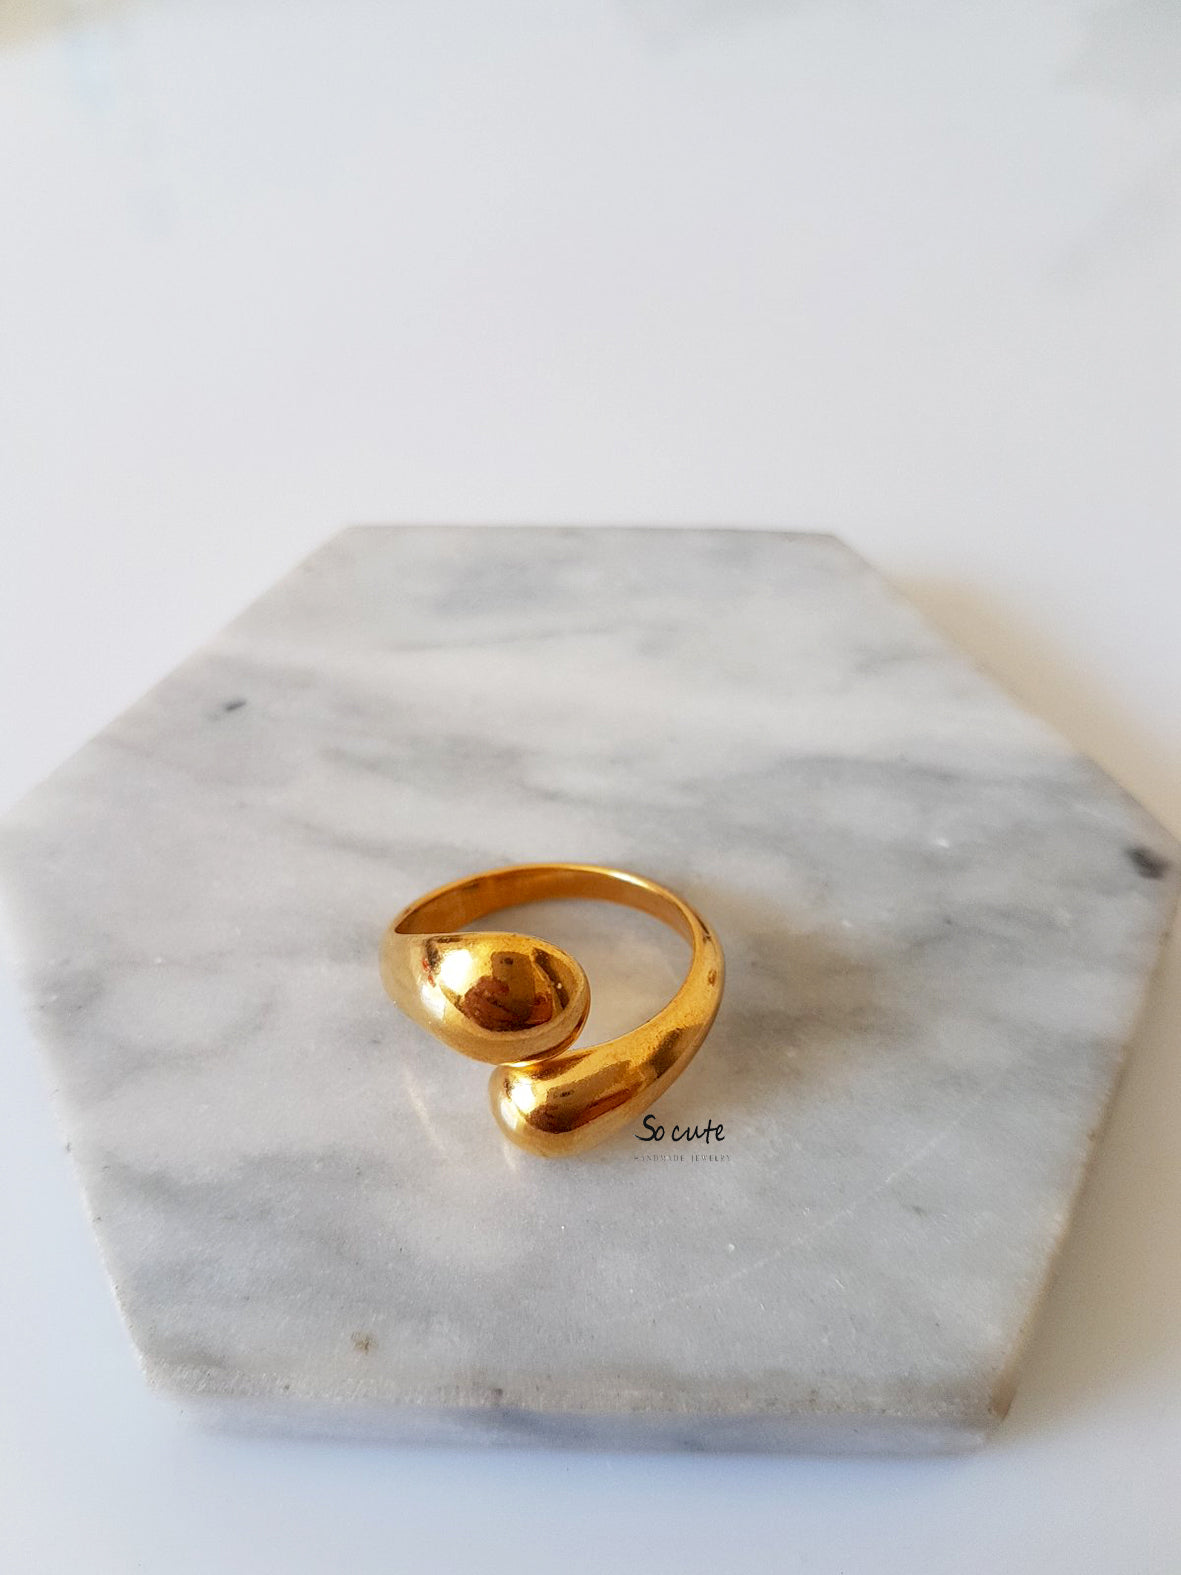 Sylvie ring in a package of 3 pieces